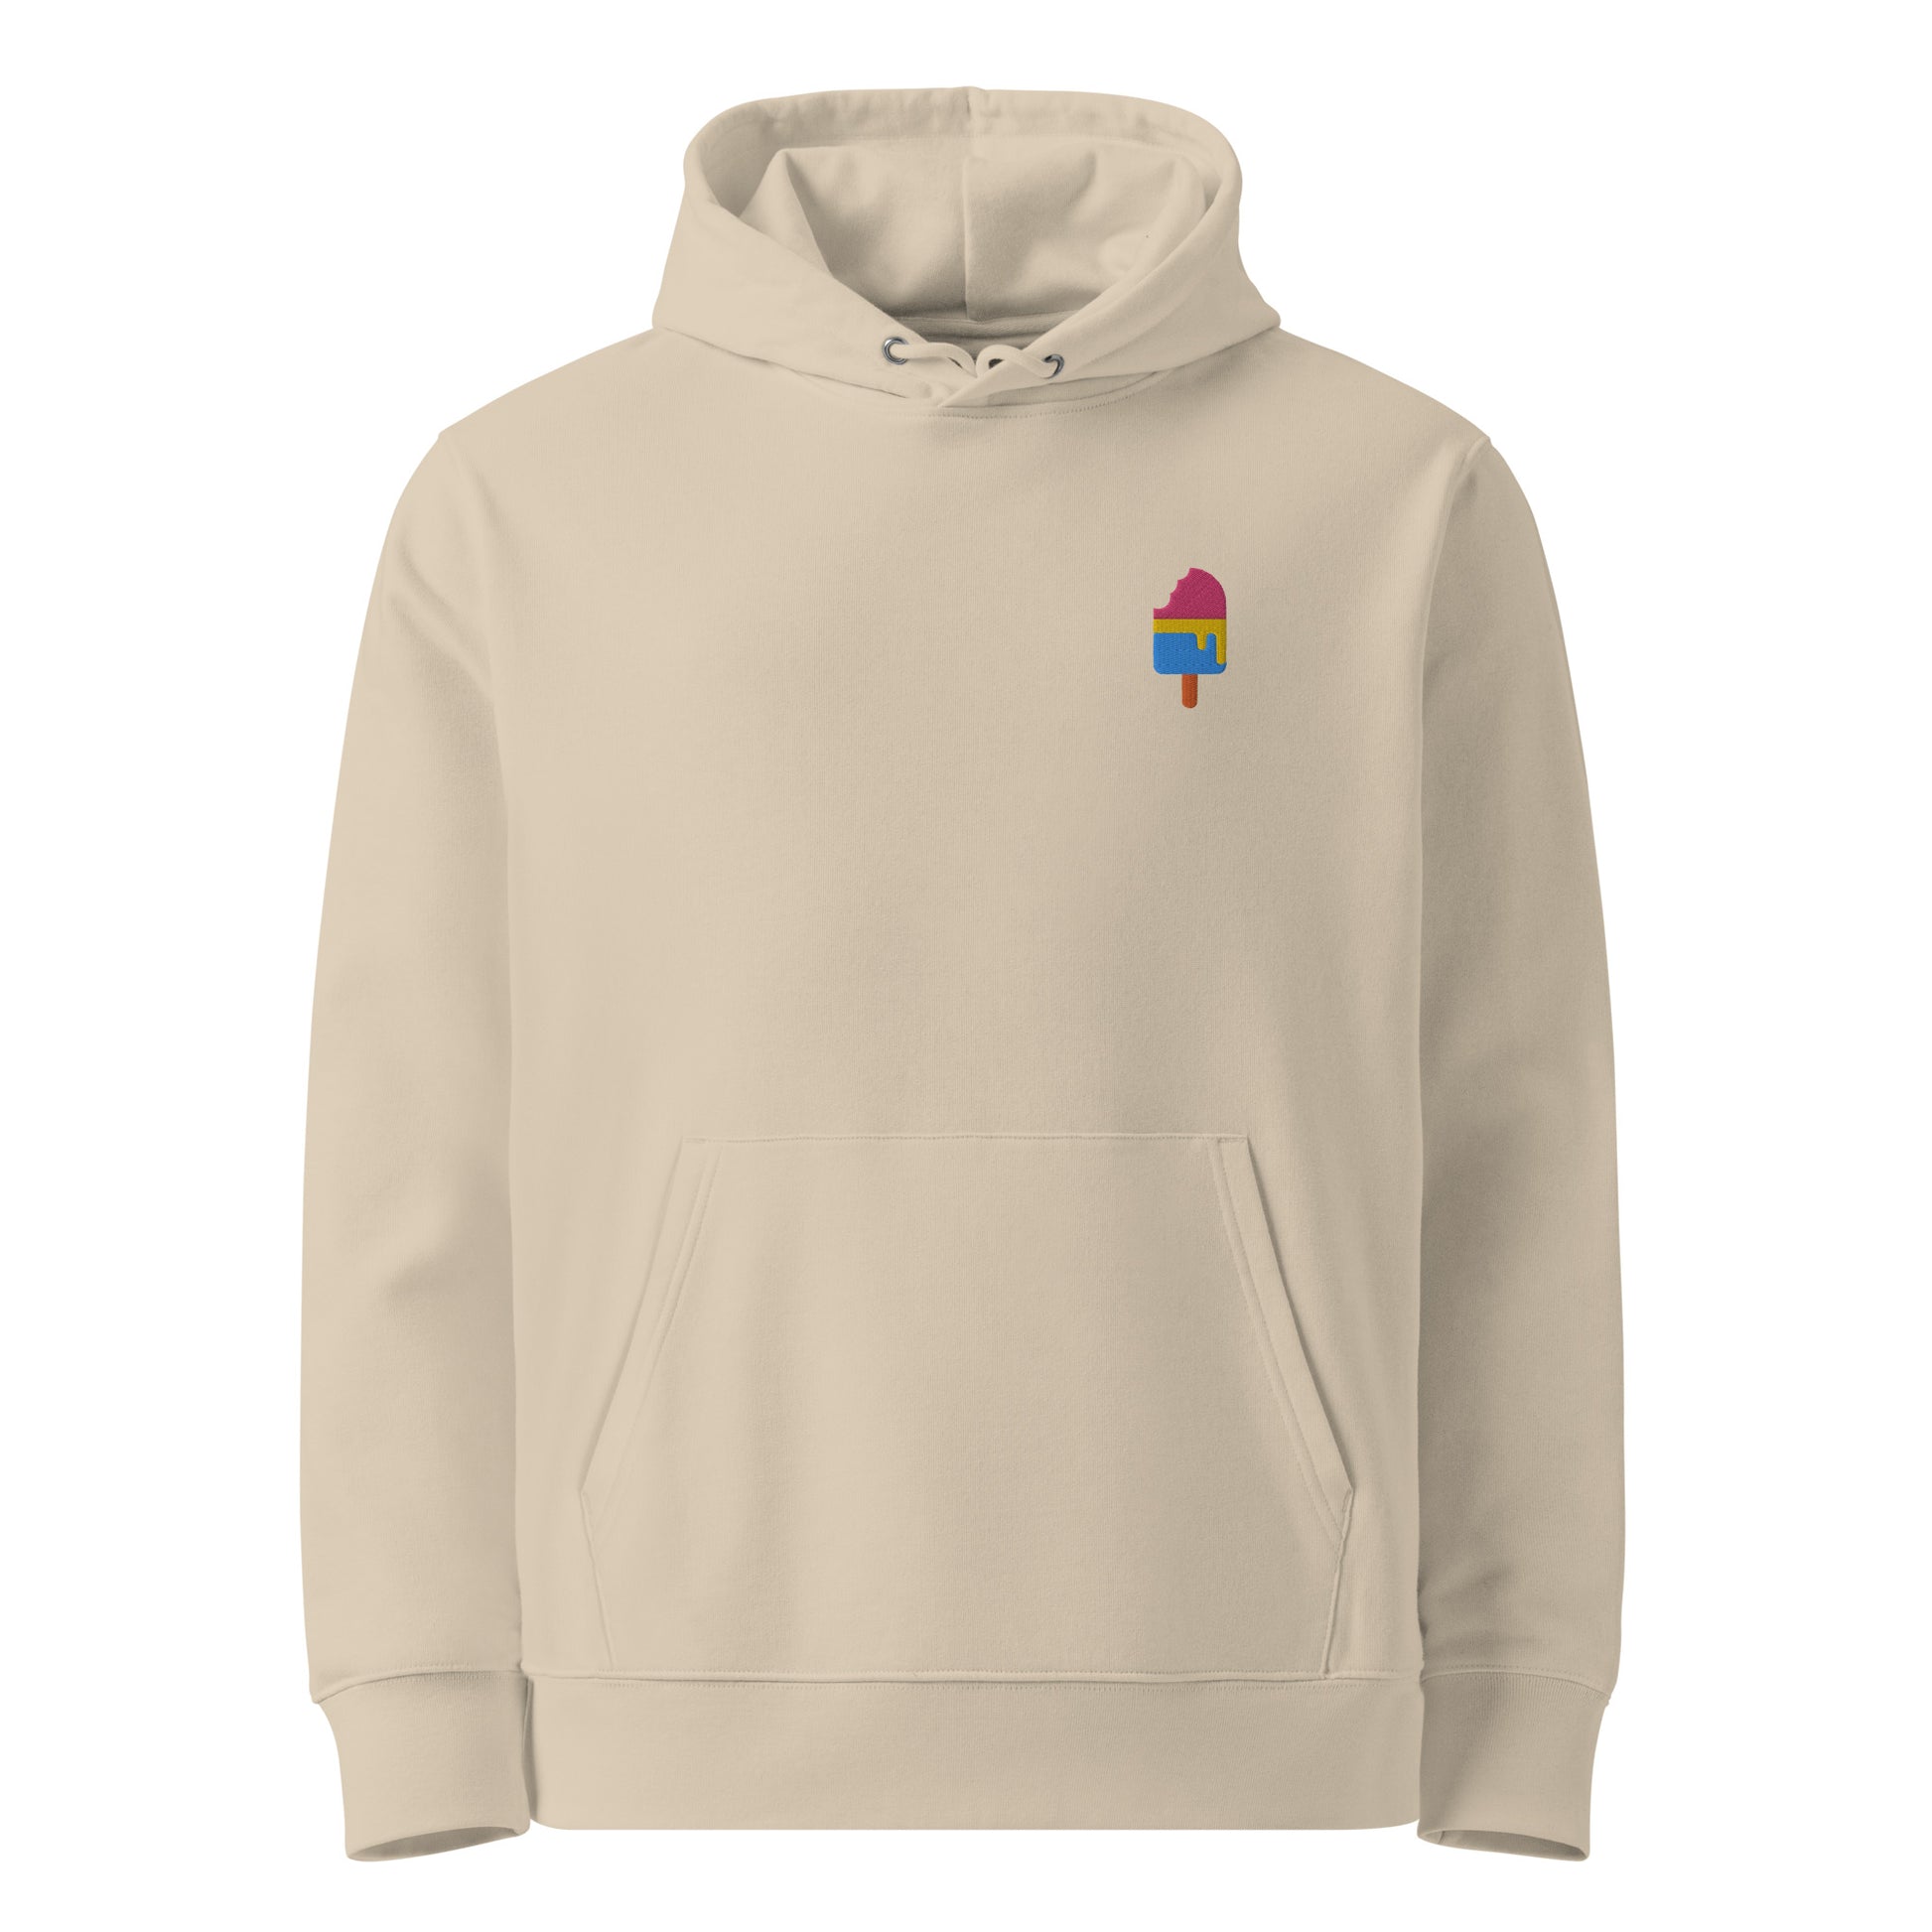 Unisex eco-friendly desert dust hoodie featuring on the upper left chest; a subtle embroidered melting ice cream in pansexual colors, adding a touch of lgbtq to your outfit. sizes: small, medium, large, extra large, double extra large.